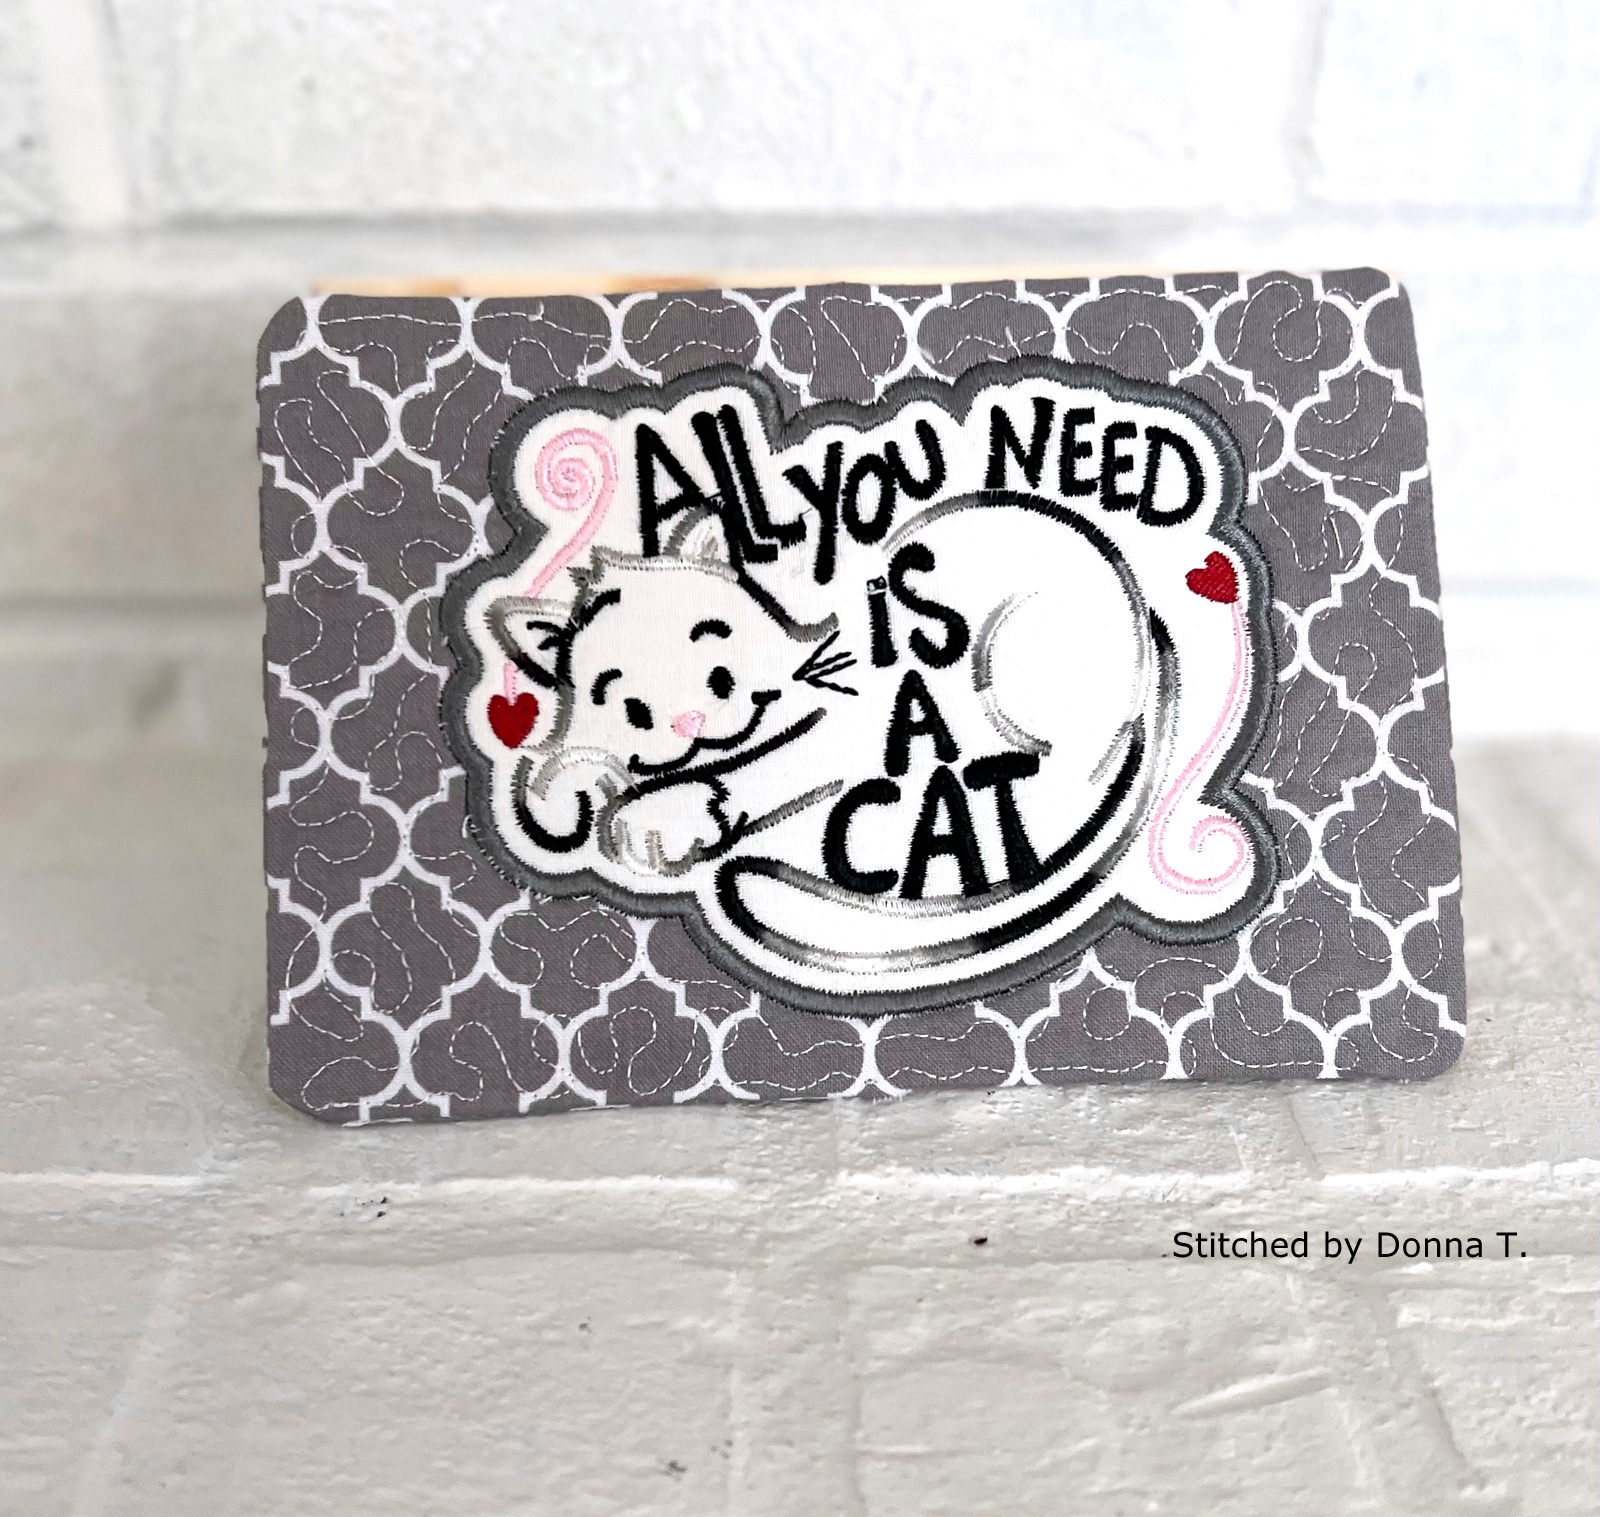 All You Need is a Cat Mug Rug-8